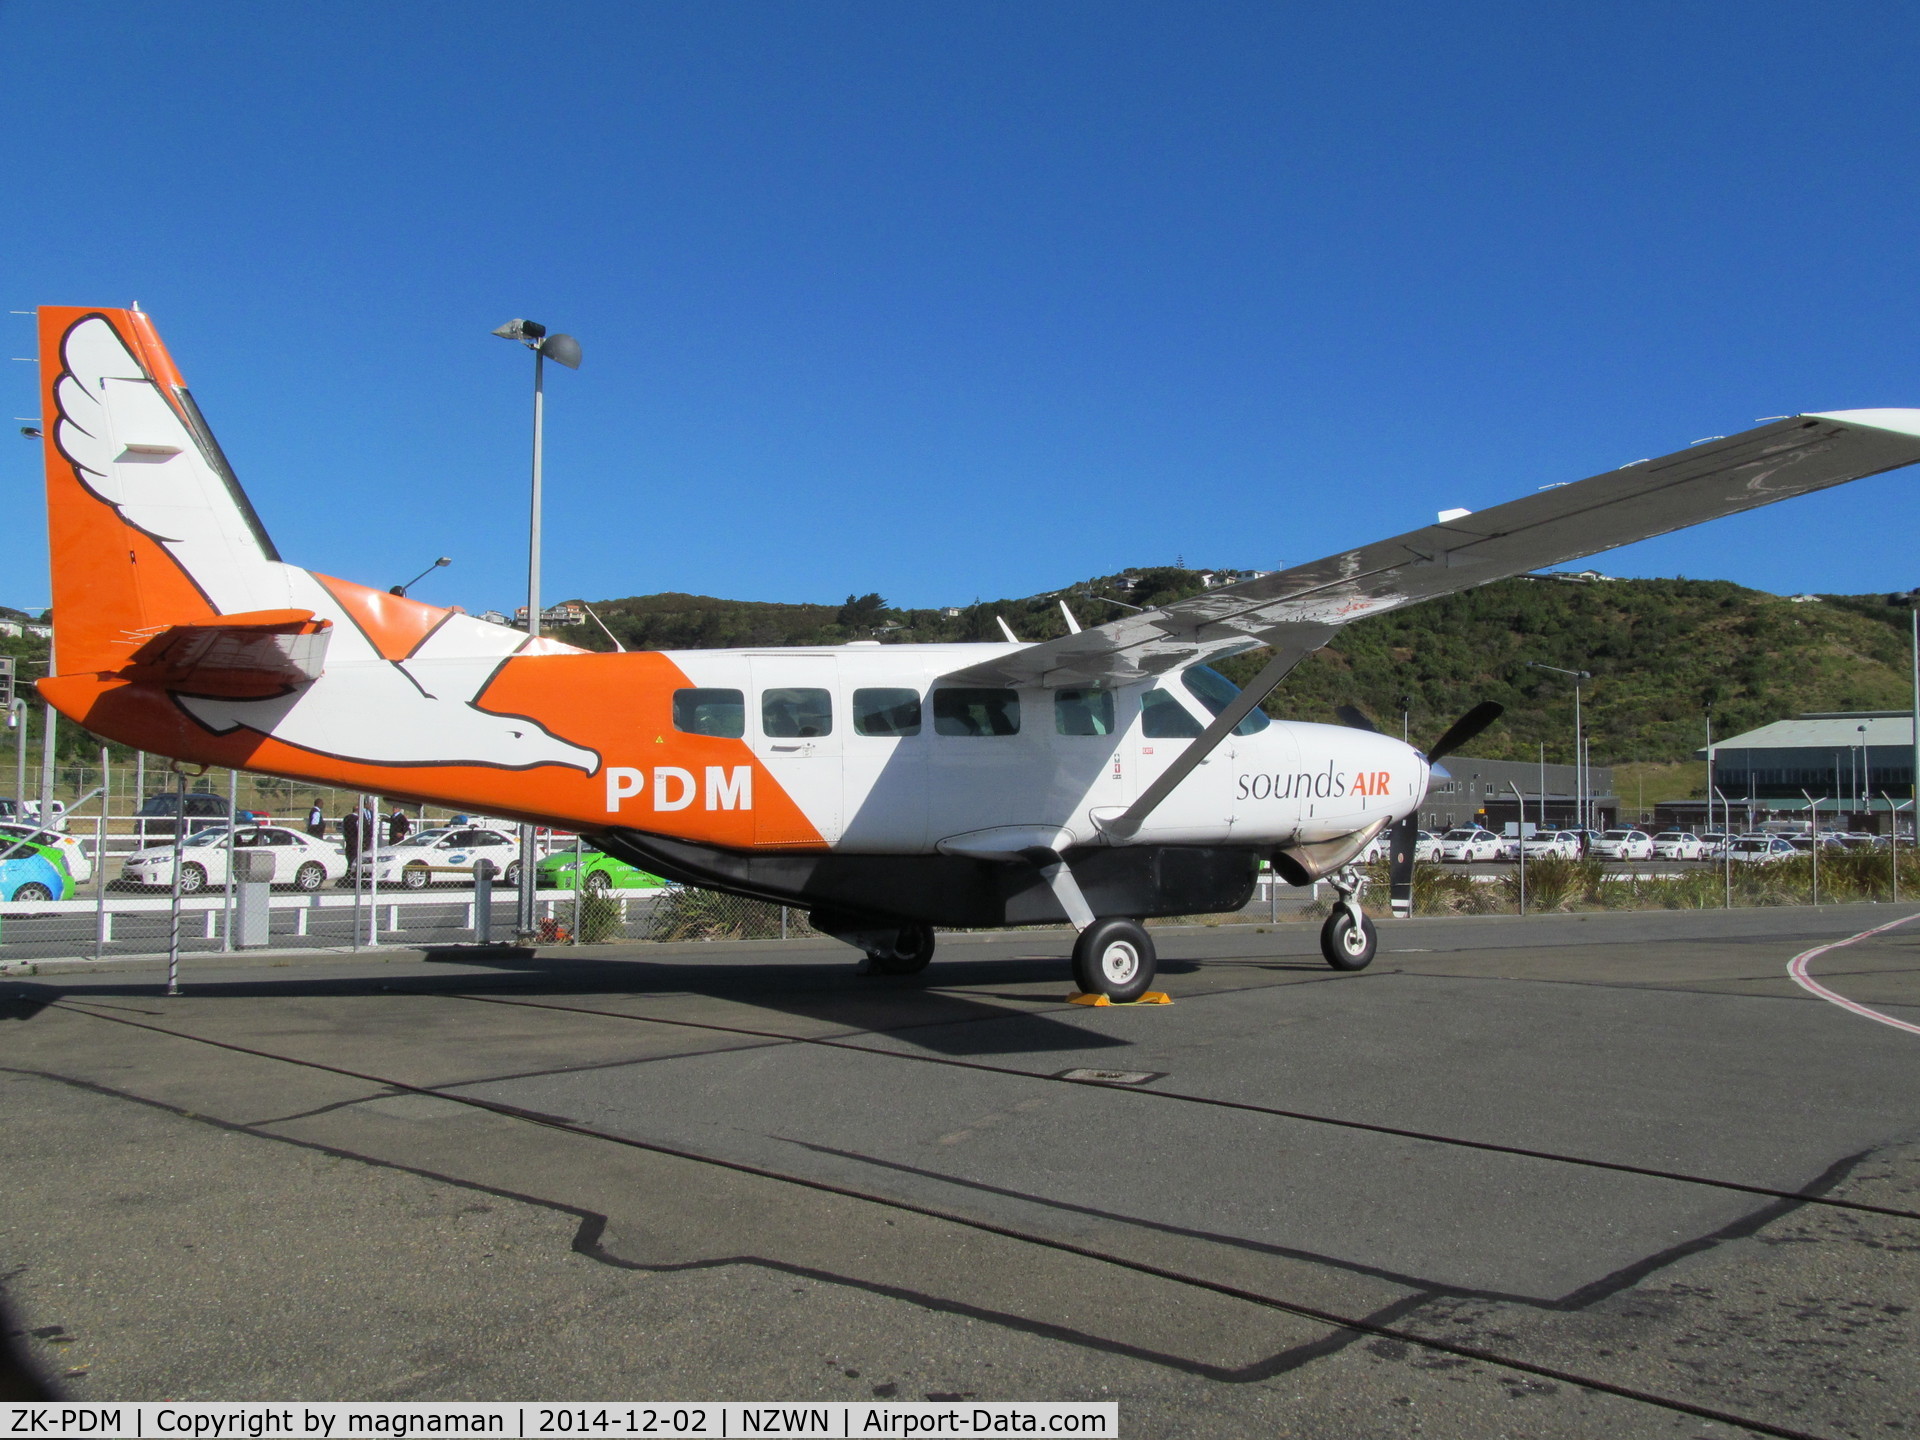 ZK-PDM, Cessna 208 Caravan 1 C/N 20800240, a number of these c208 are based here.